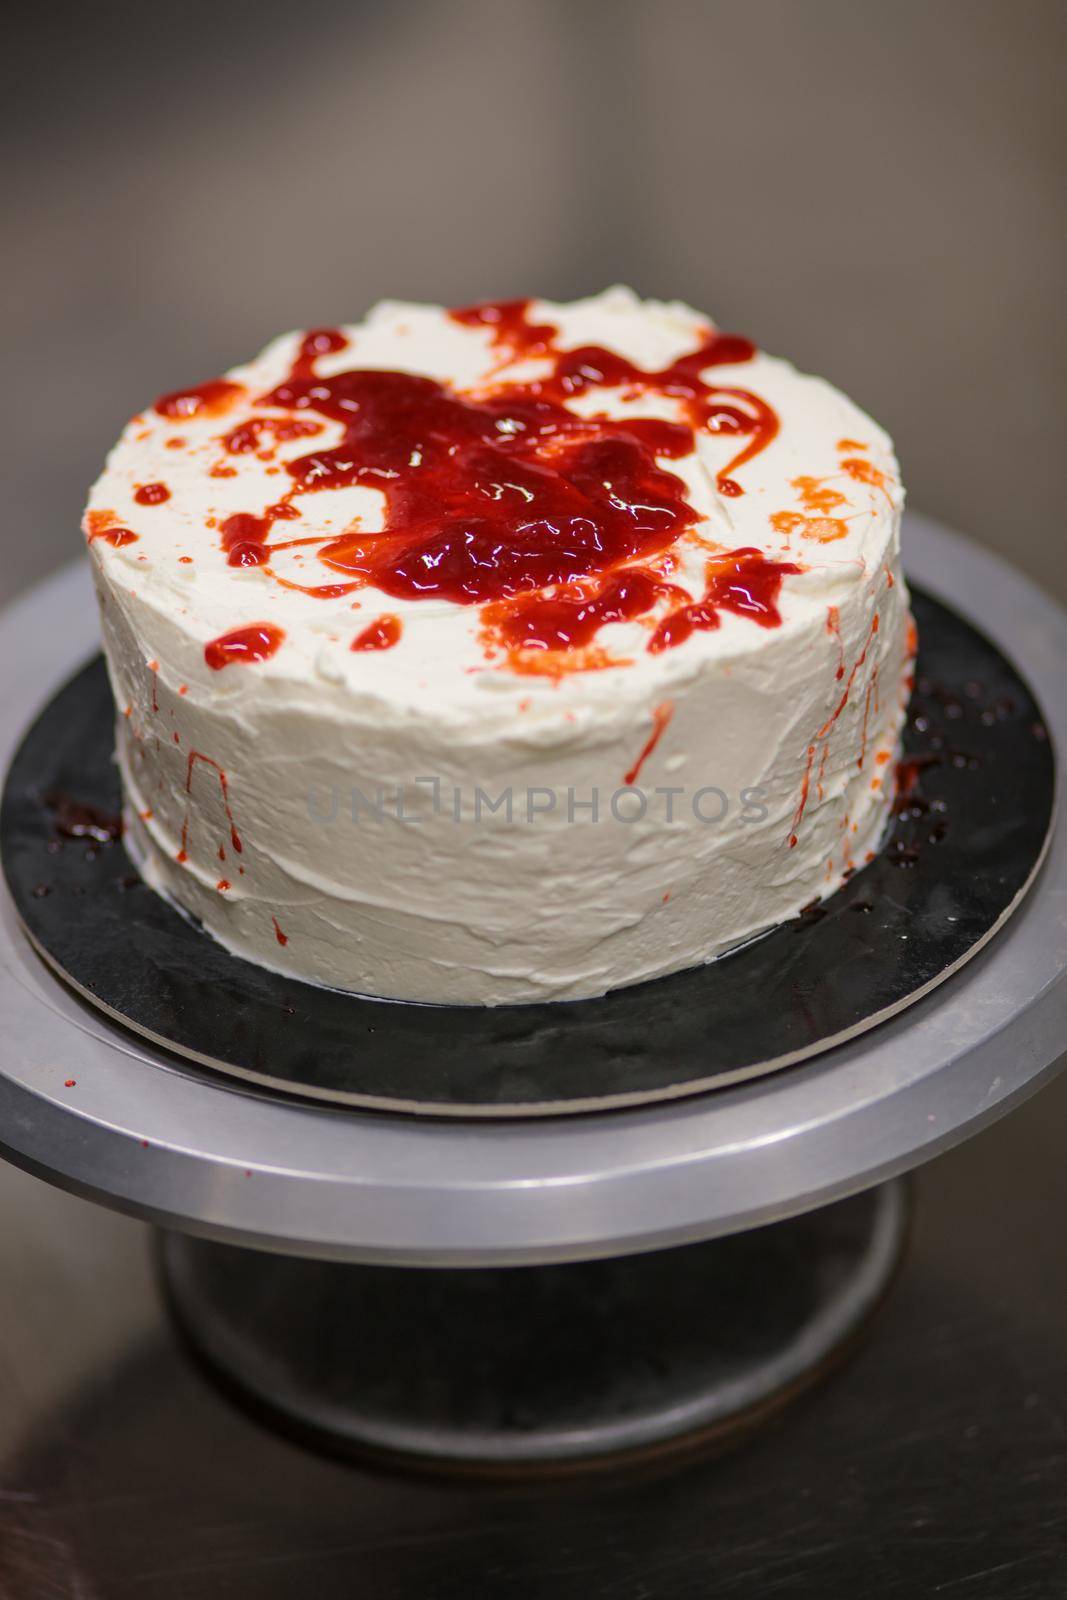 designer chef decorating white red bloody horror crime cake for halloween party by verbano